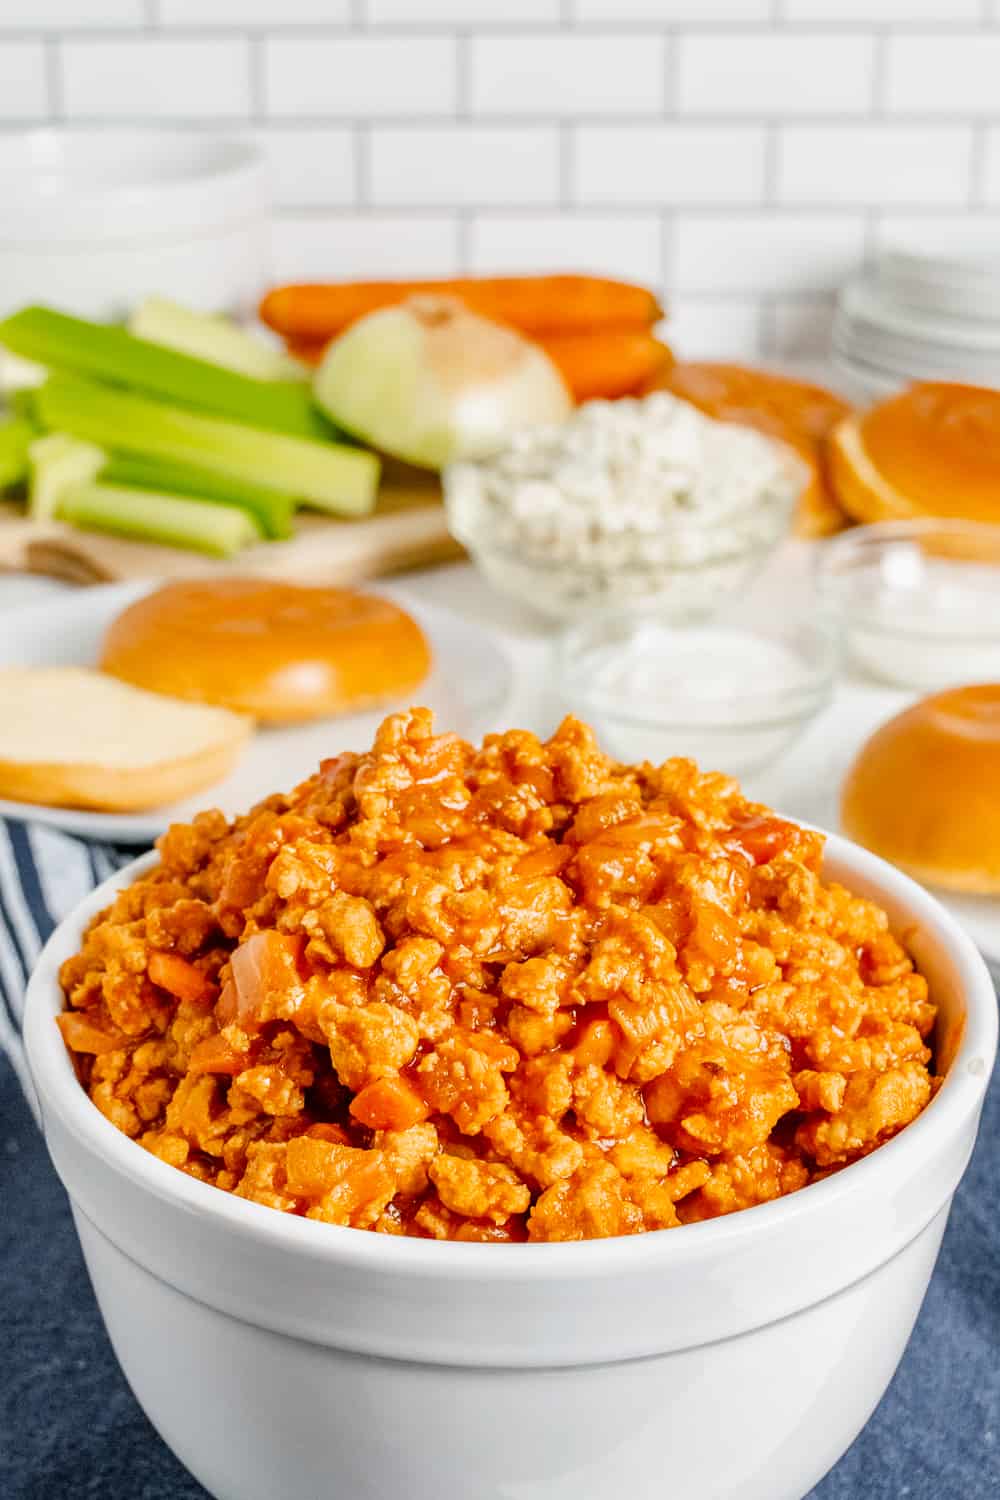 Buffalo chicken sloppy joes ground chicken mixture in a bowl with rolls and toppings behind it